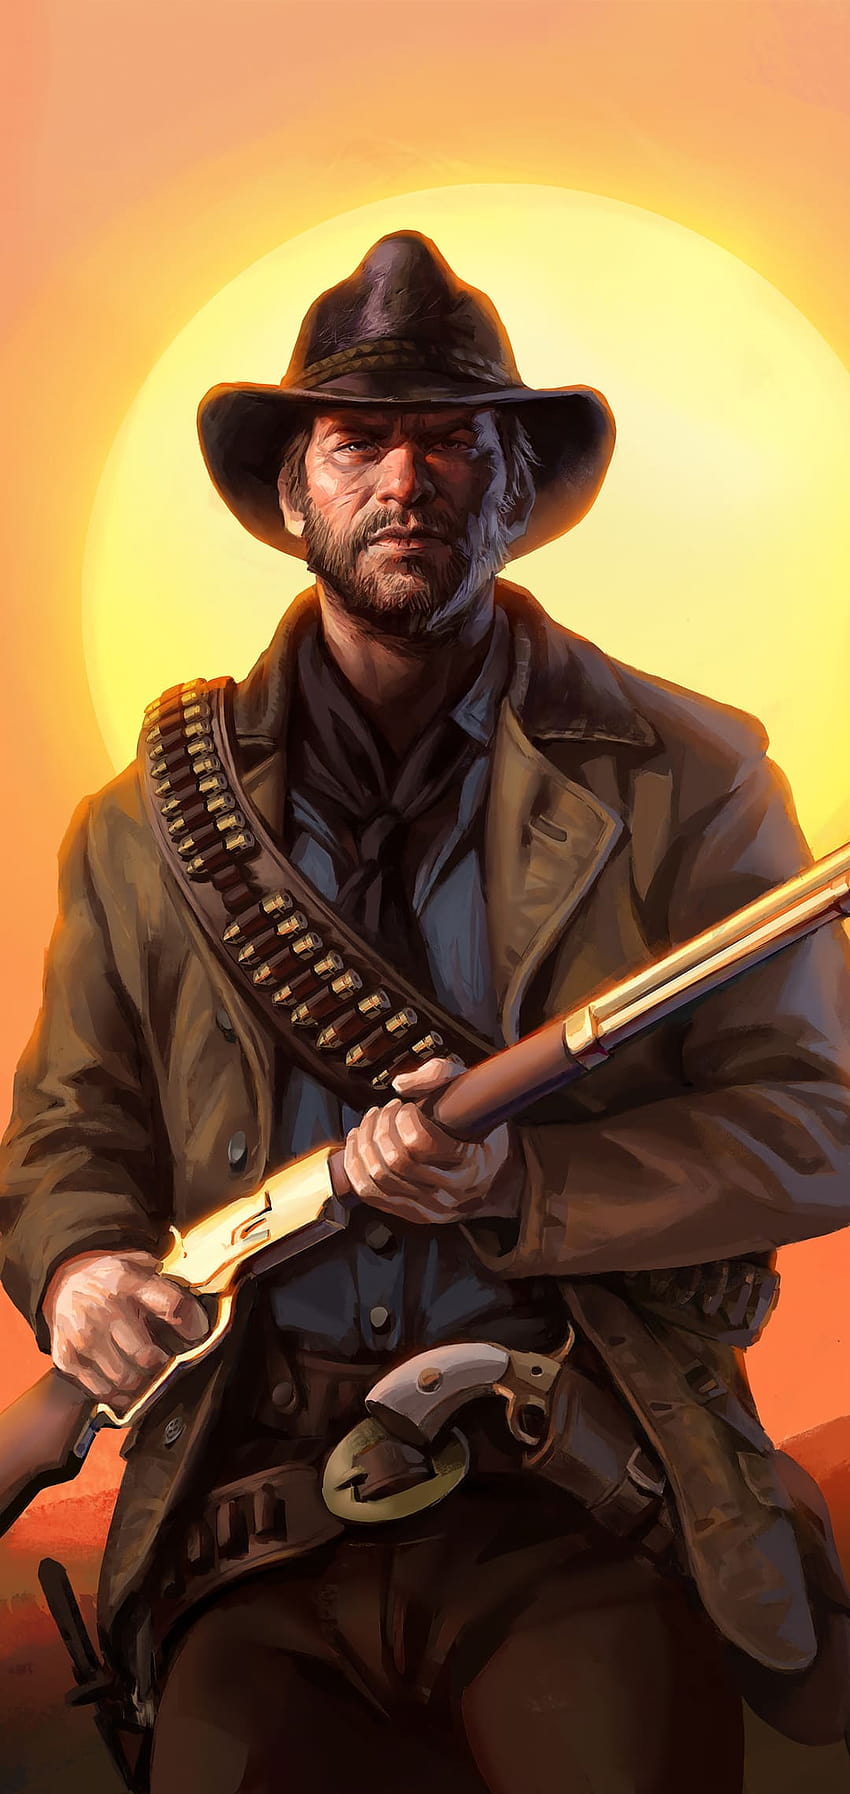 Red Dead Redemption Mobile, red dead redemption 2 mobile HD phone wallpaper